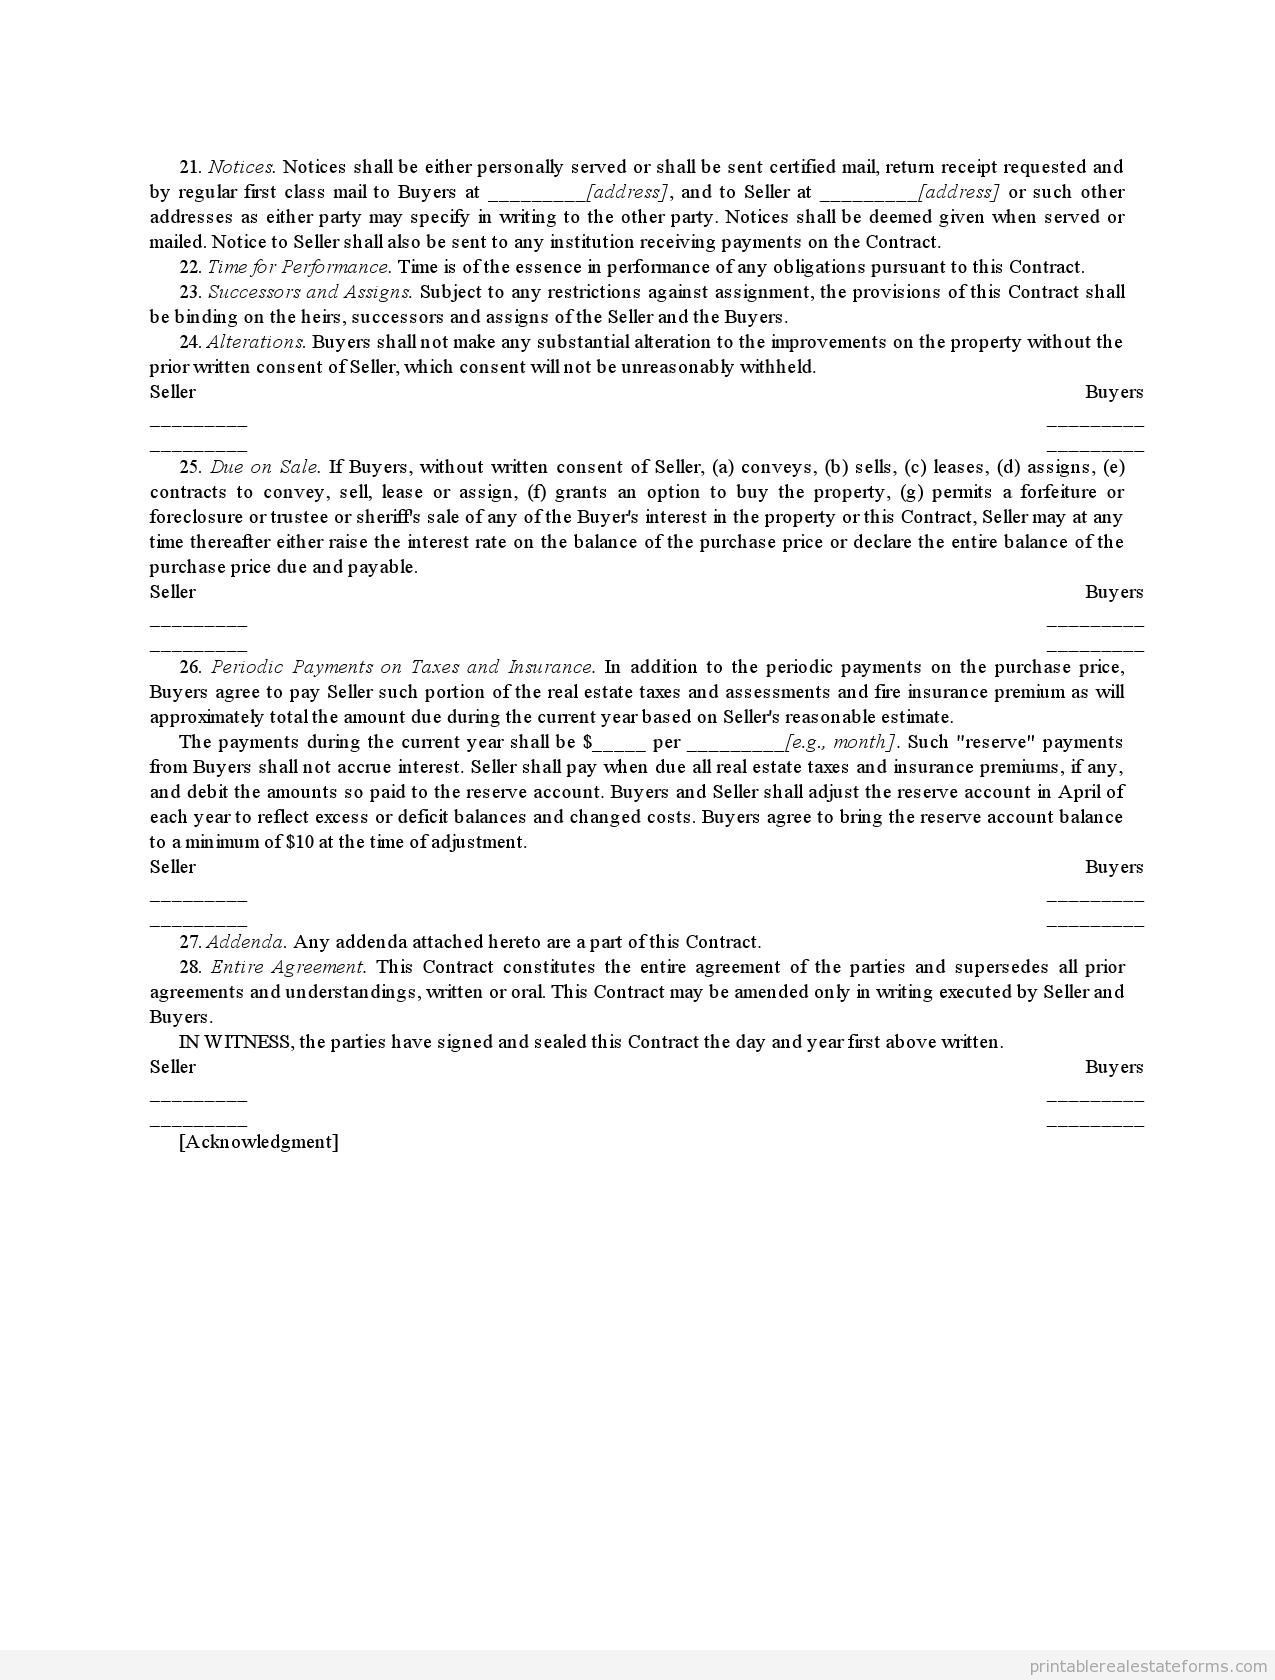 Sample Printable Installment Land Contract Form | Printable Real - Free Printable Land Contract Forms